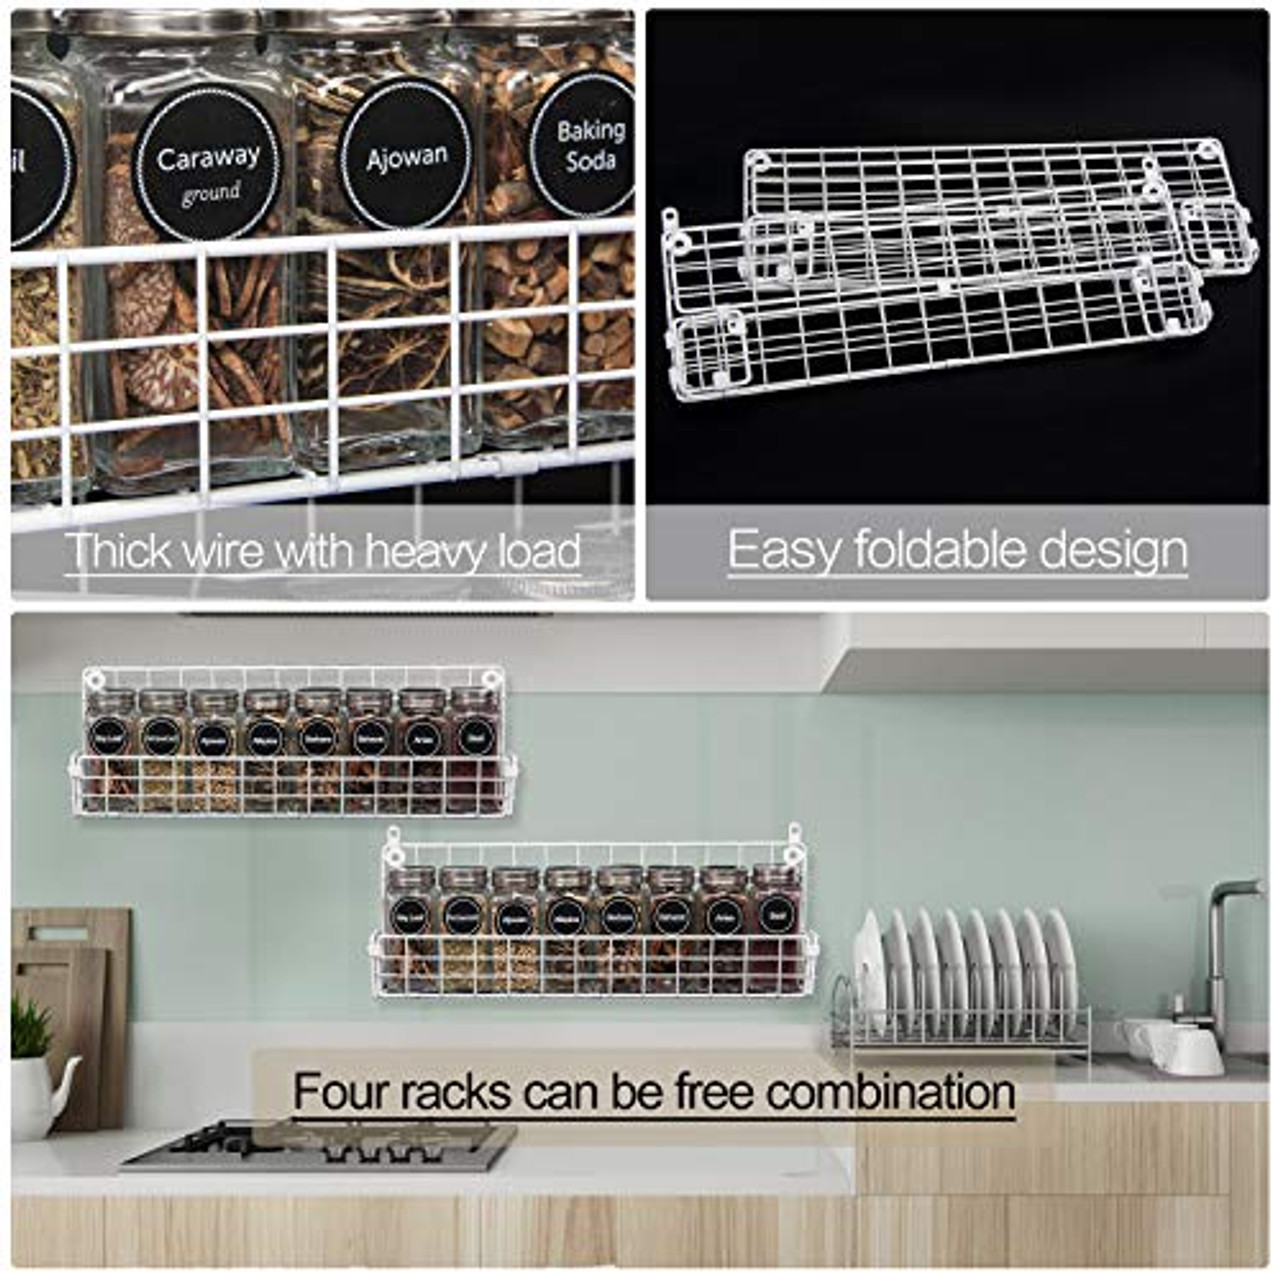 Wood Spice Shelf Wood Spice Rack Wall Mounted Spice Rack Spice Rack  Organizer Kitchen Shelves IKEA Spice Jars Compatible 